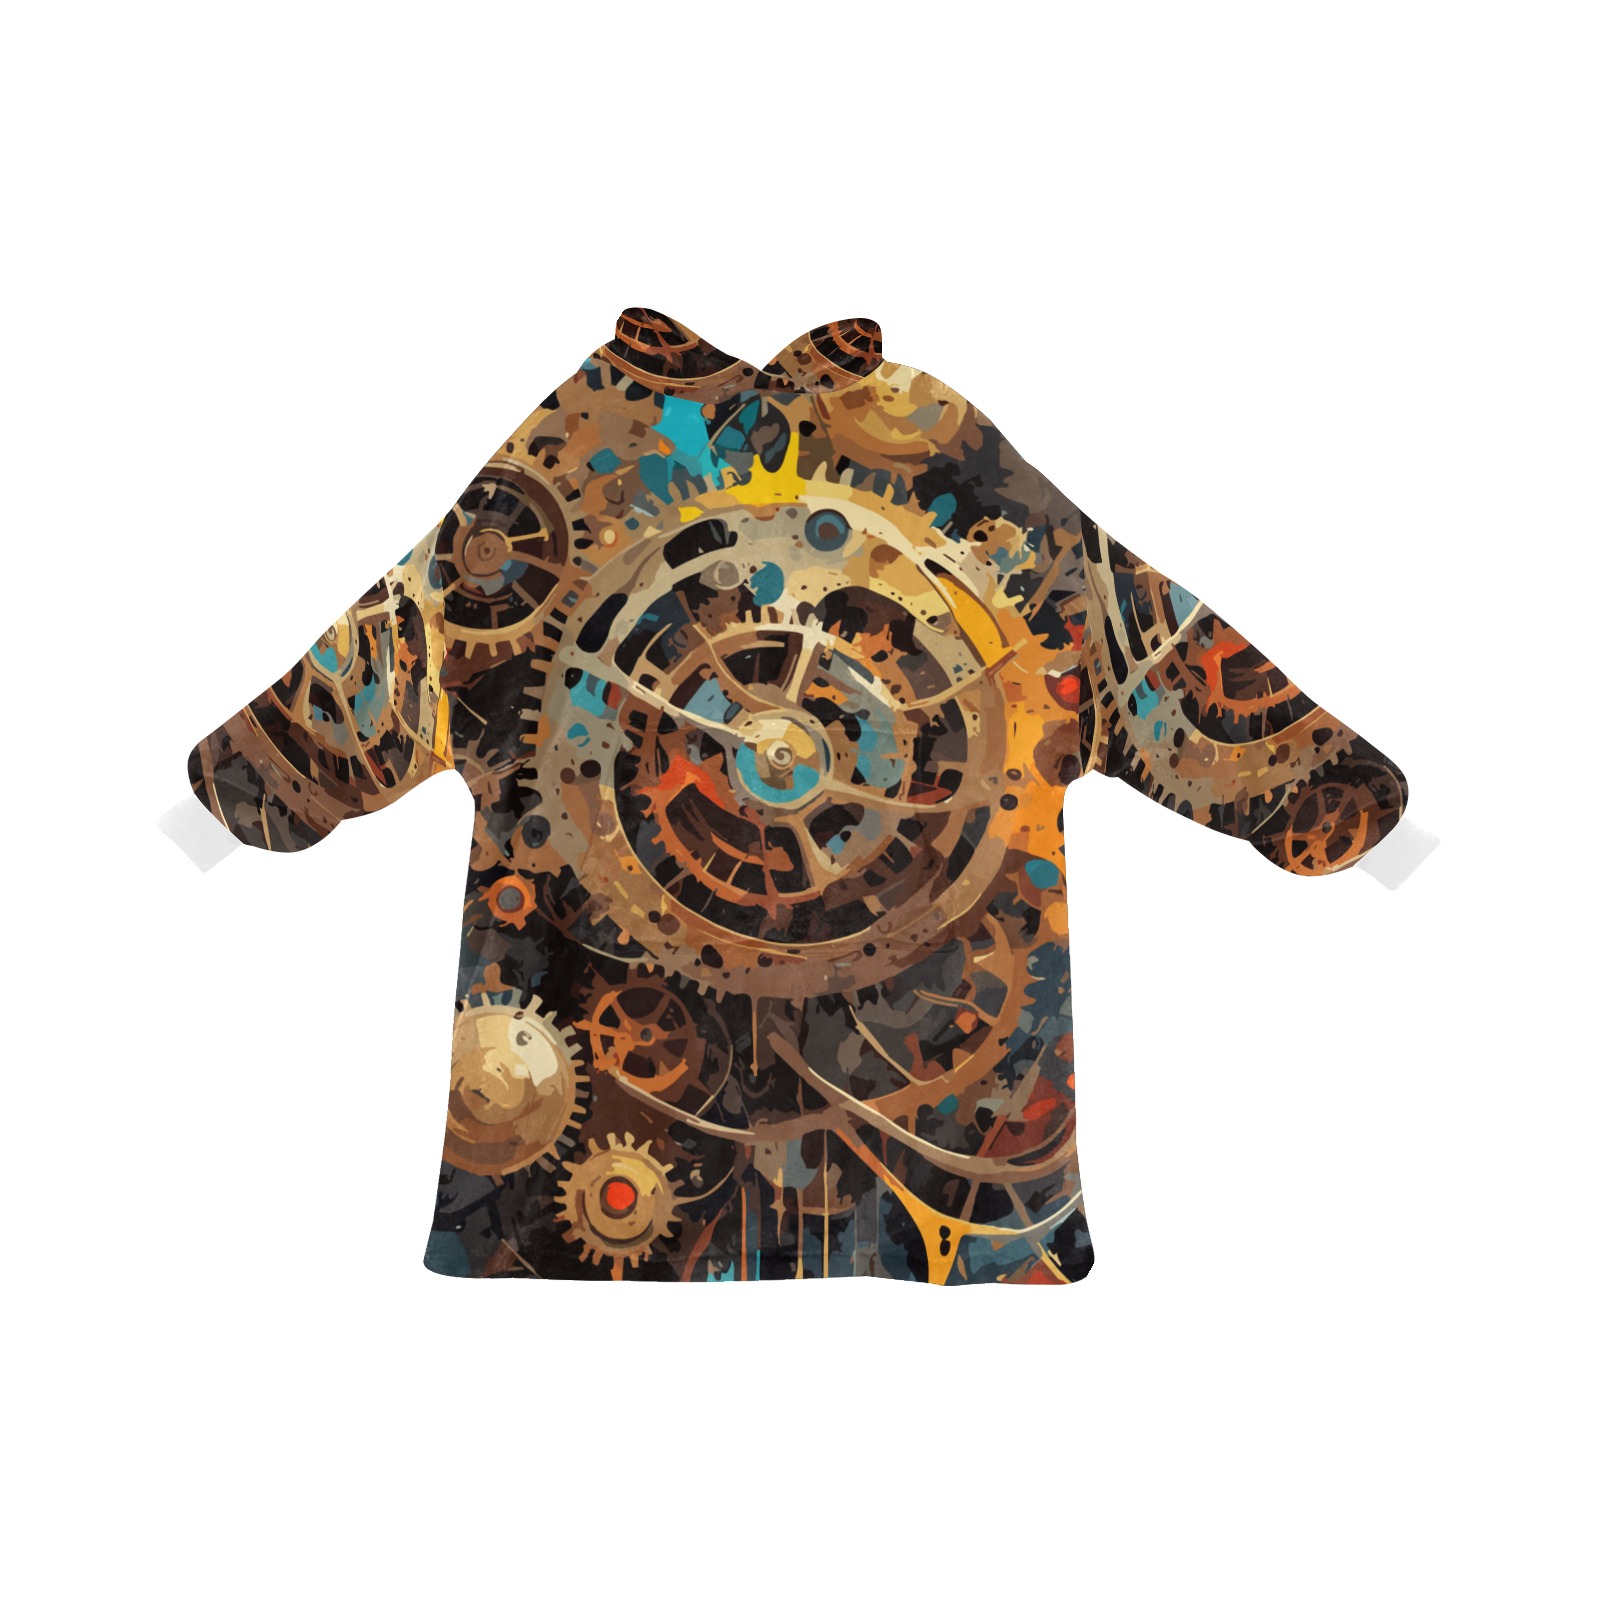 Retro Mechanical Gear Trendy Colorful Abstract Art Blanket Hoodie for Men